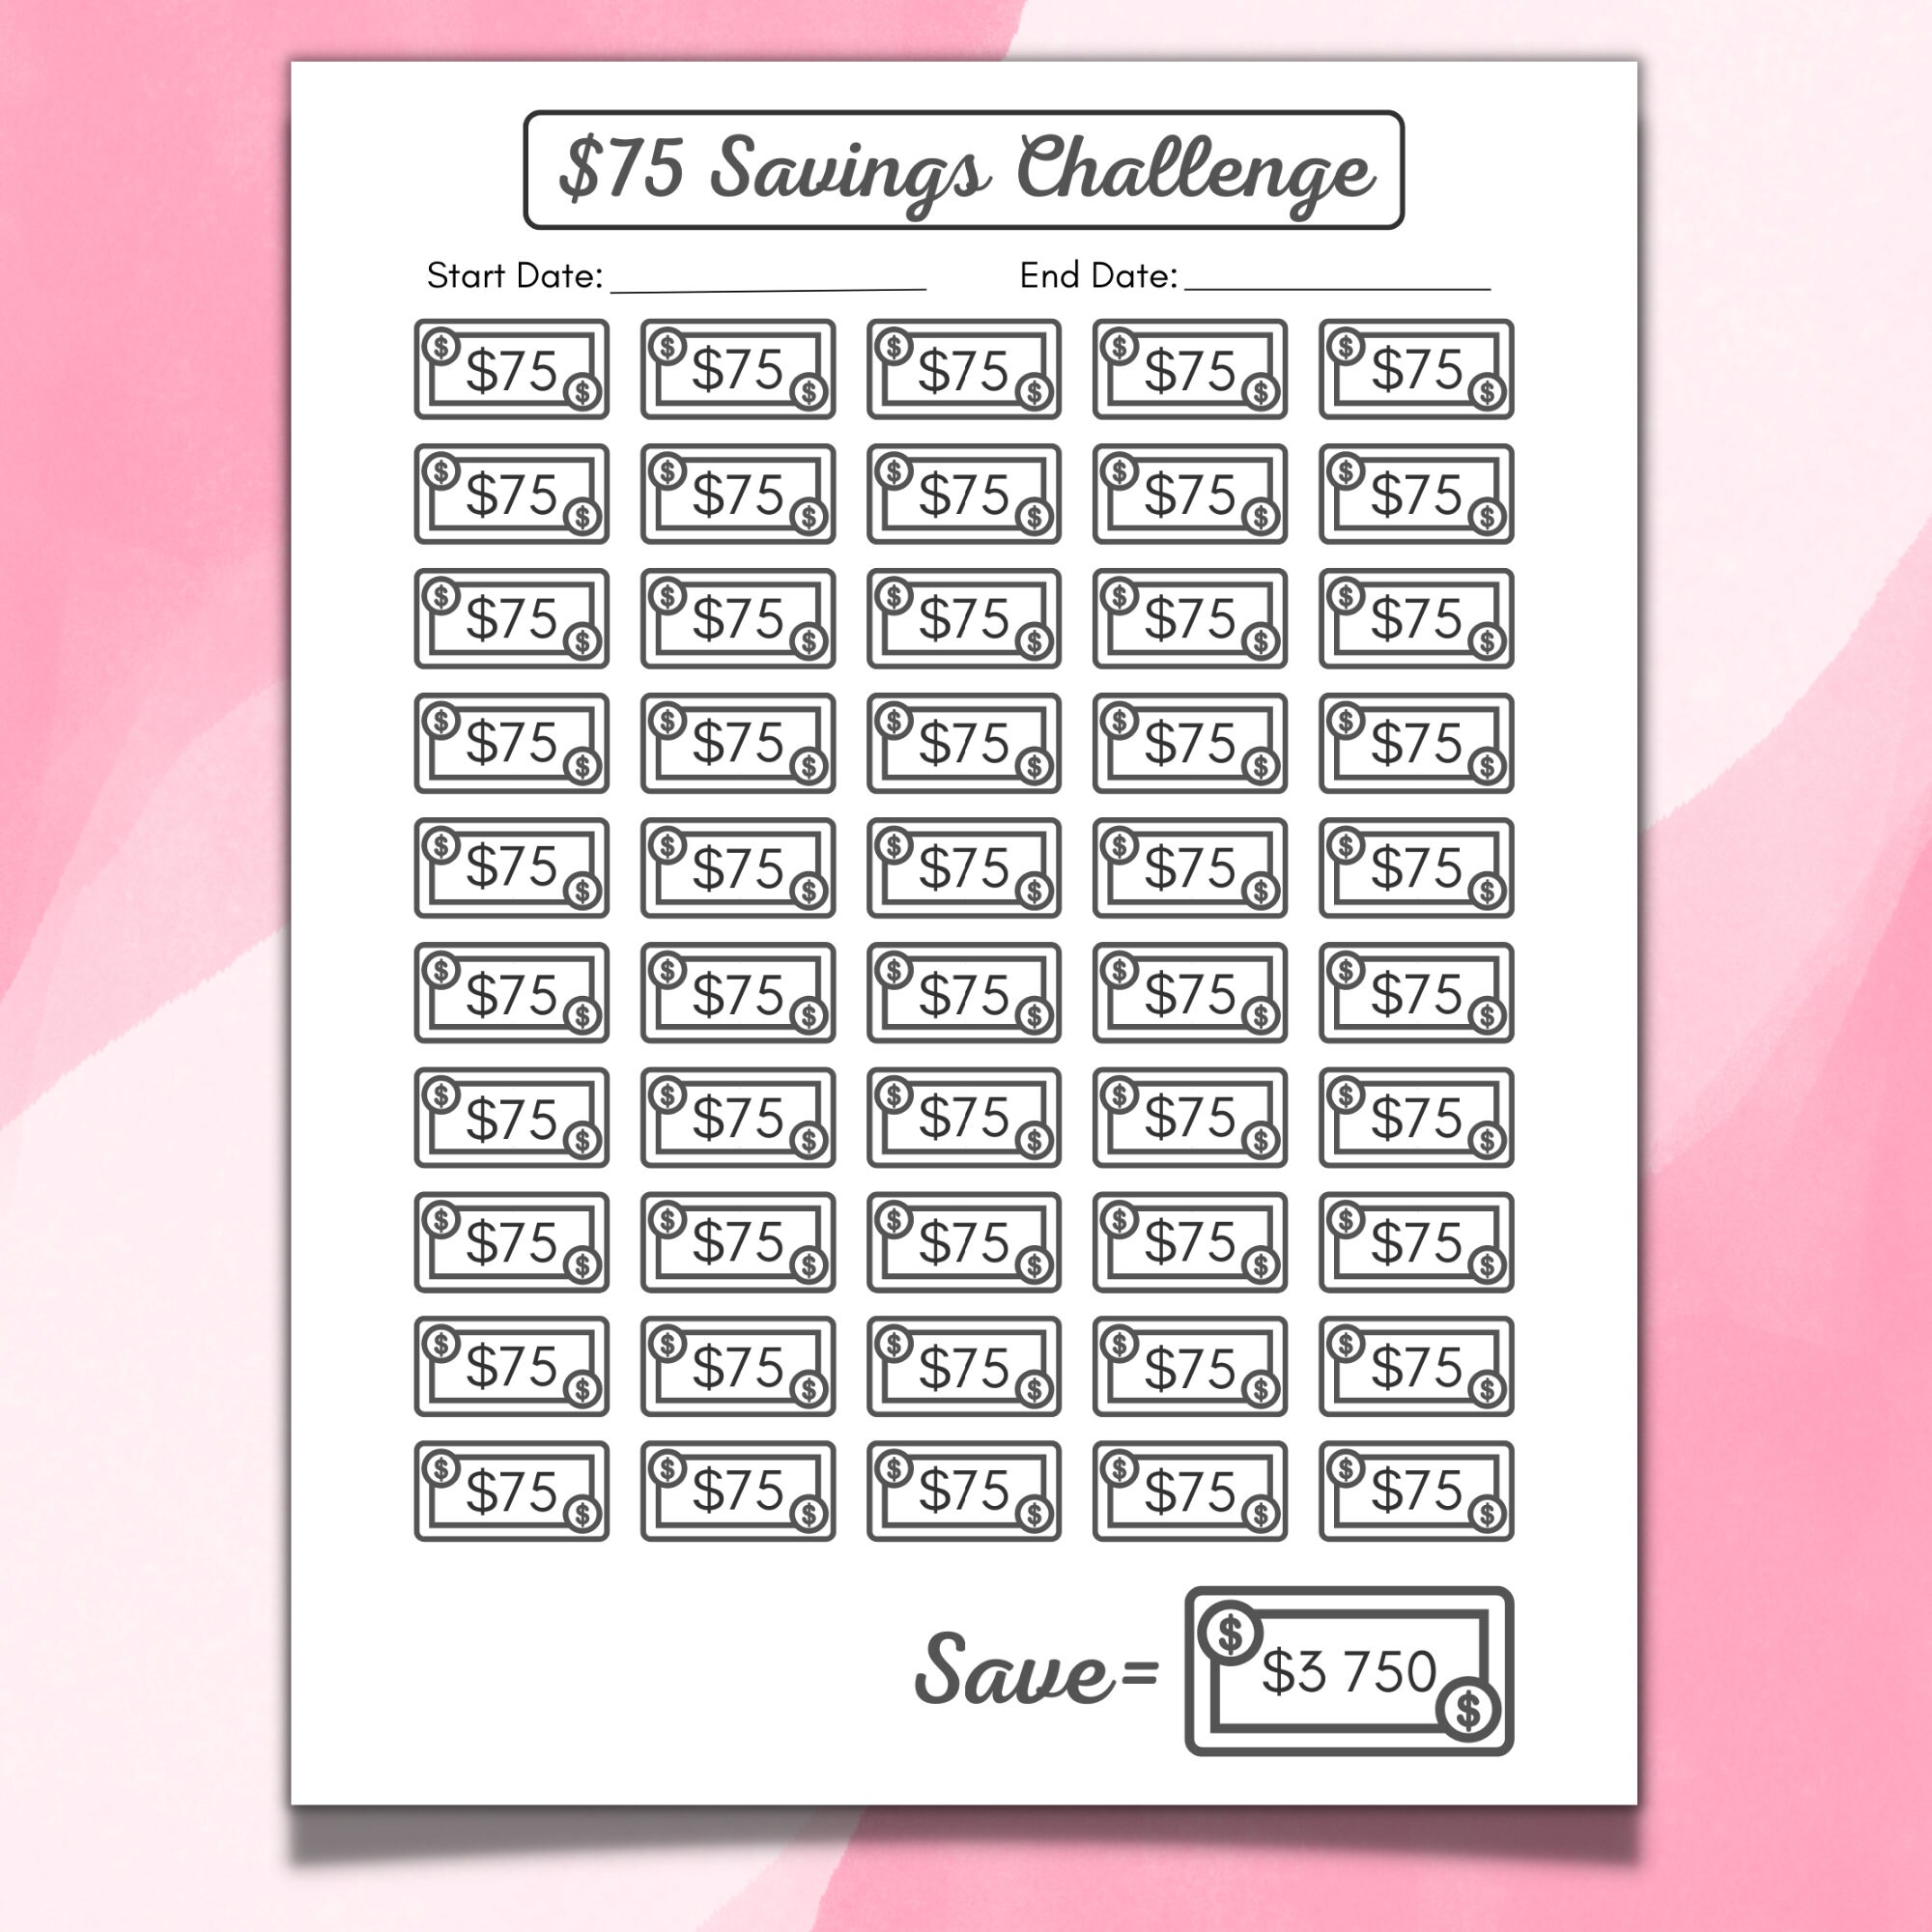 Design for free this Modern Daily Saving Challenge Budget Planner